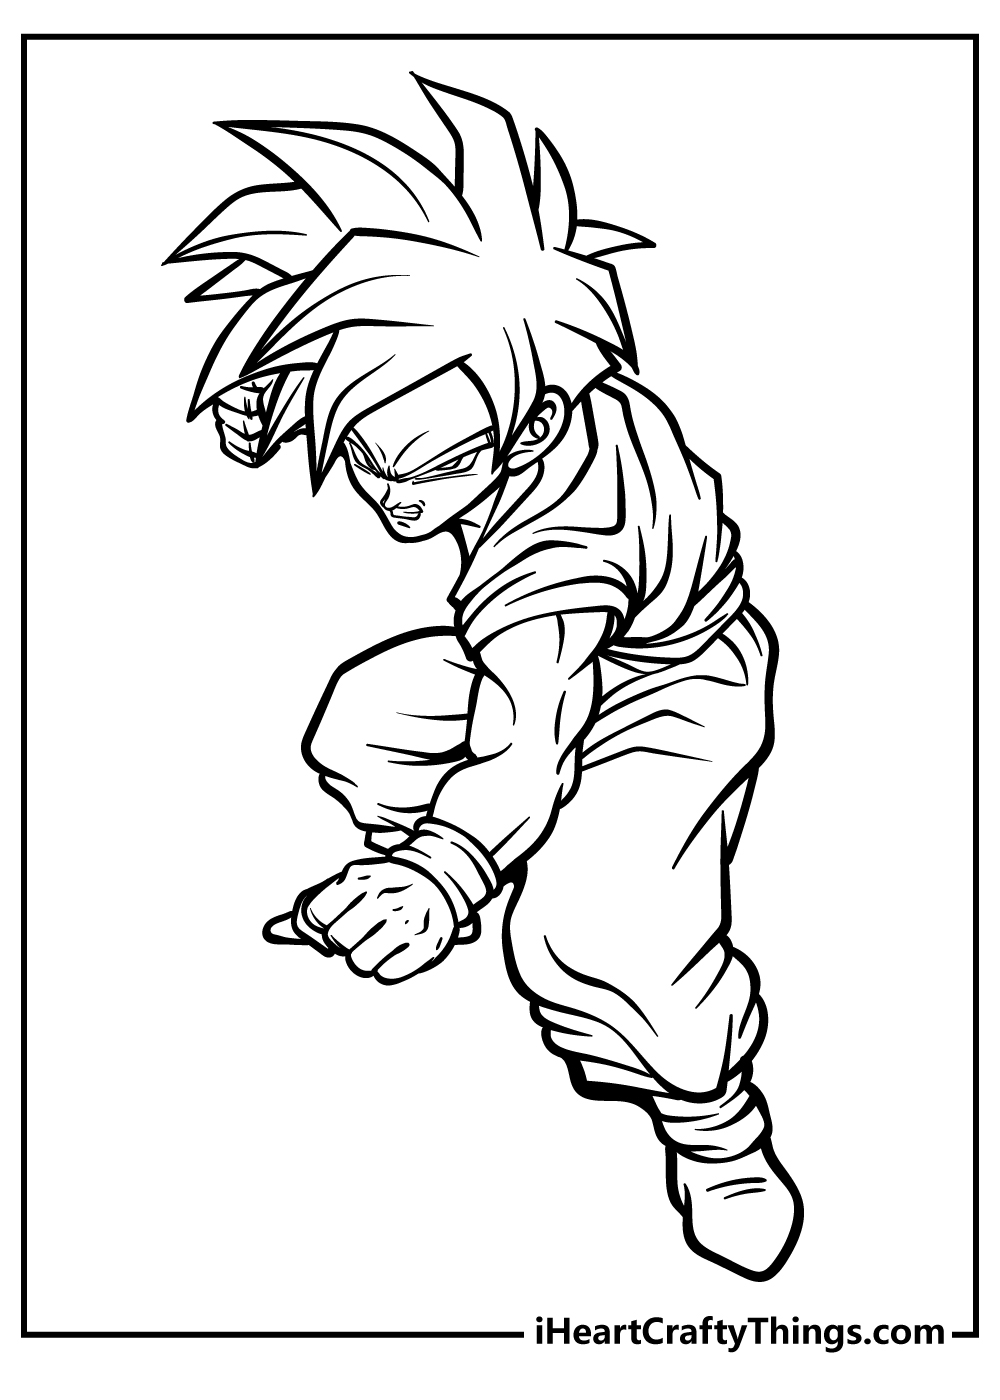 100 Exciting Dragon Ball Z Coloring Ideas 26